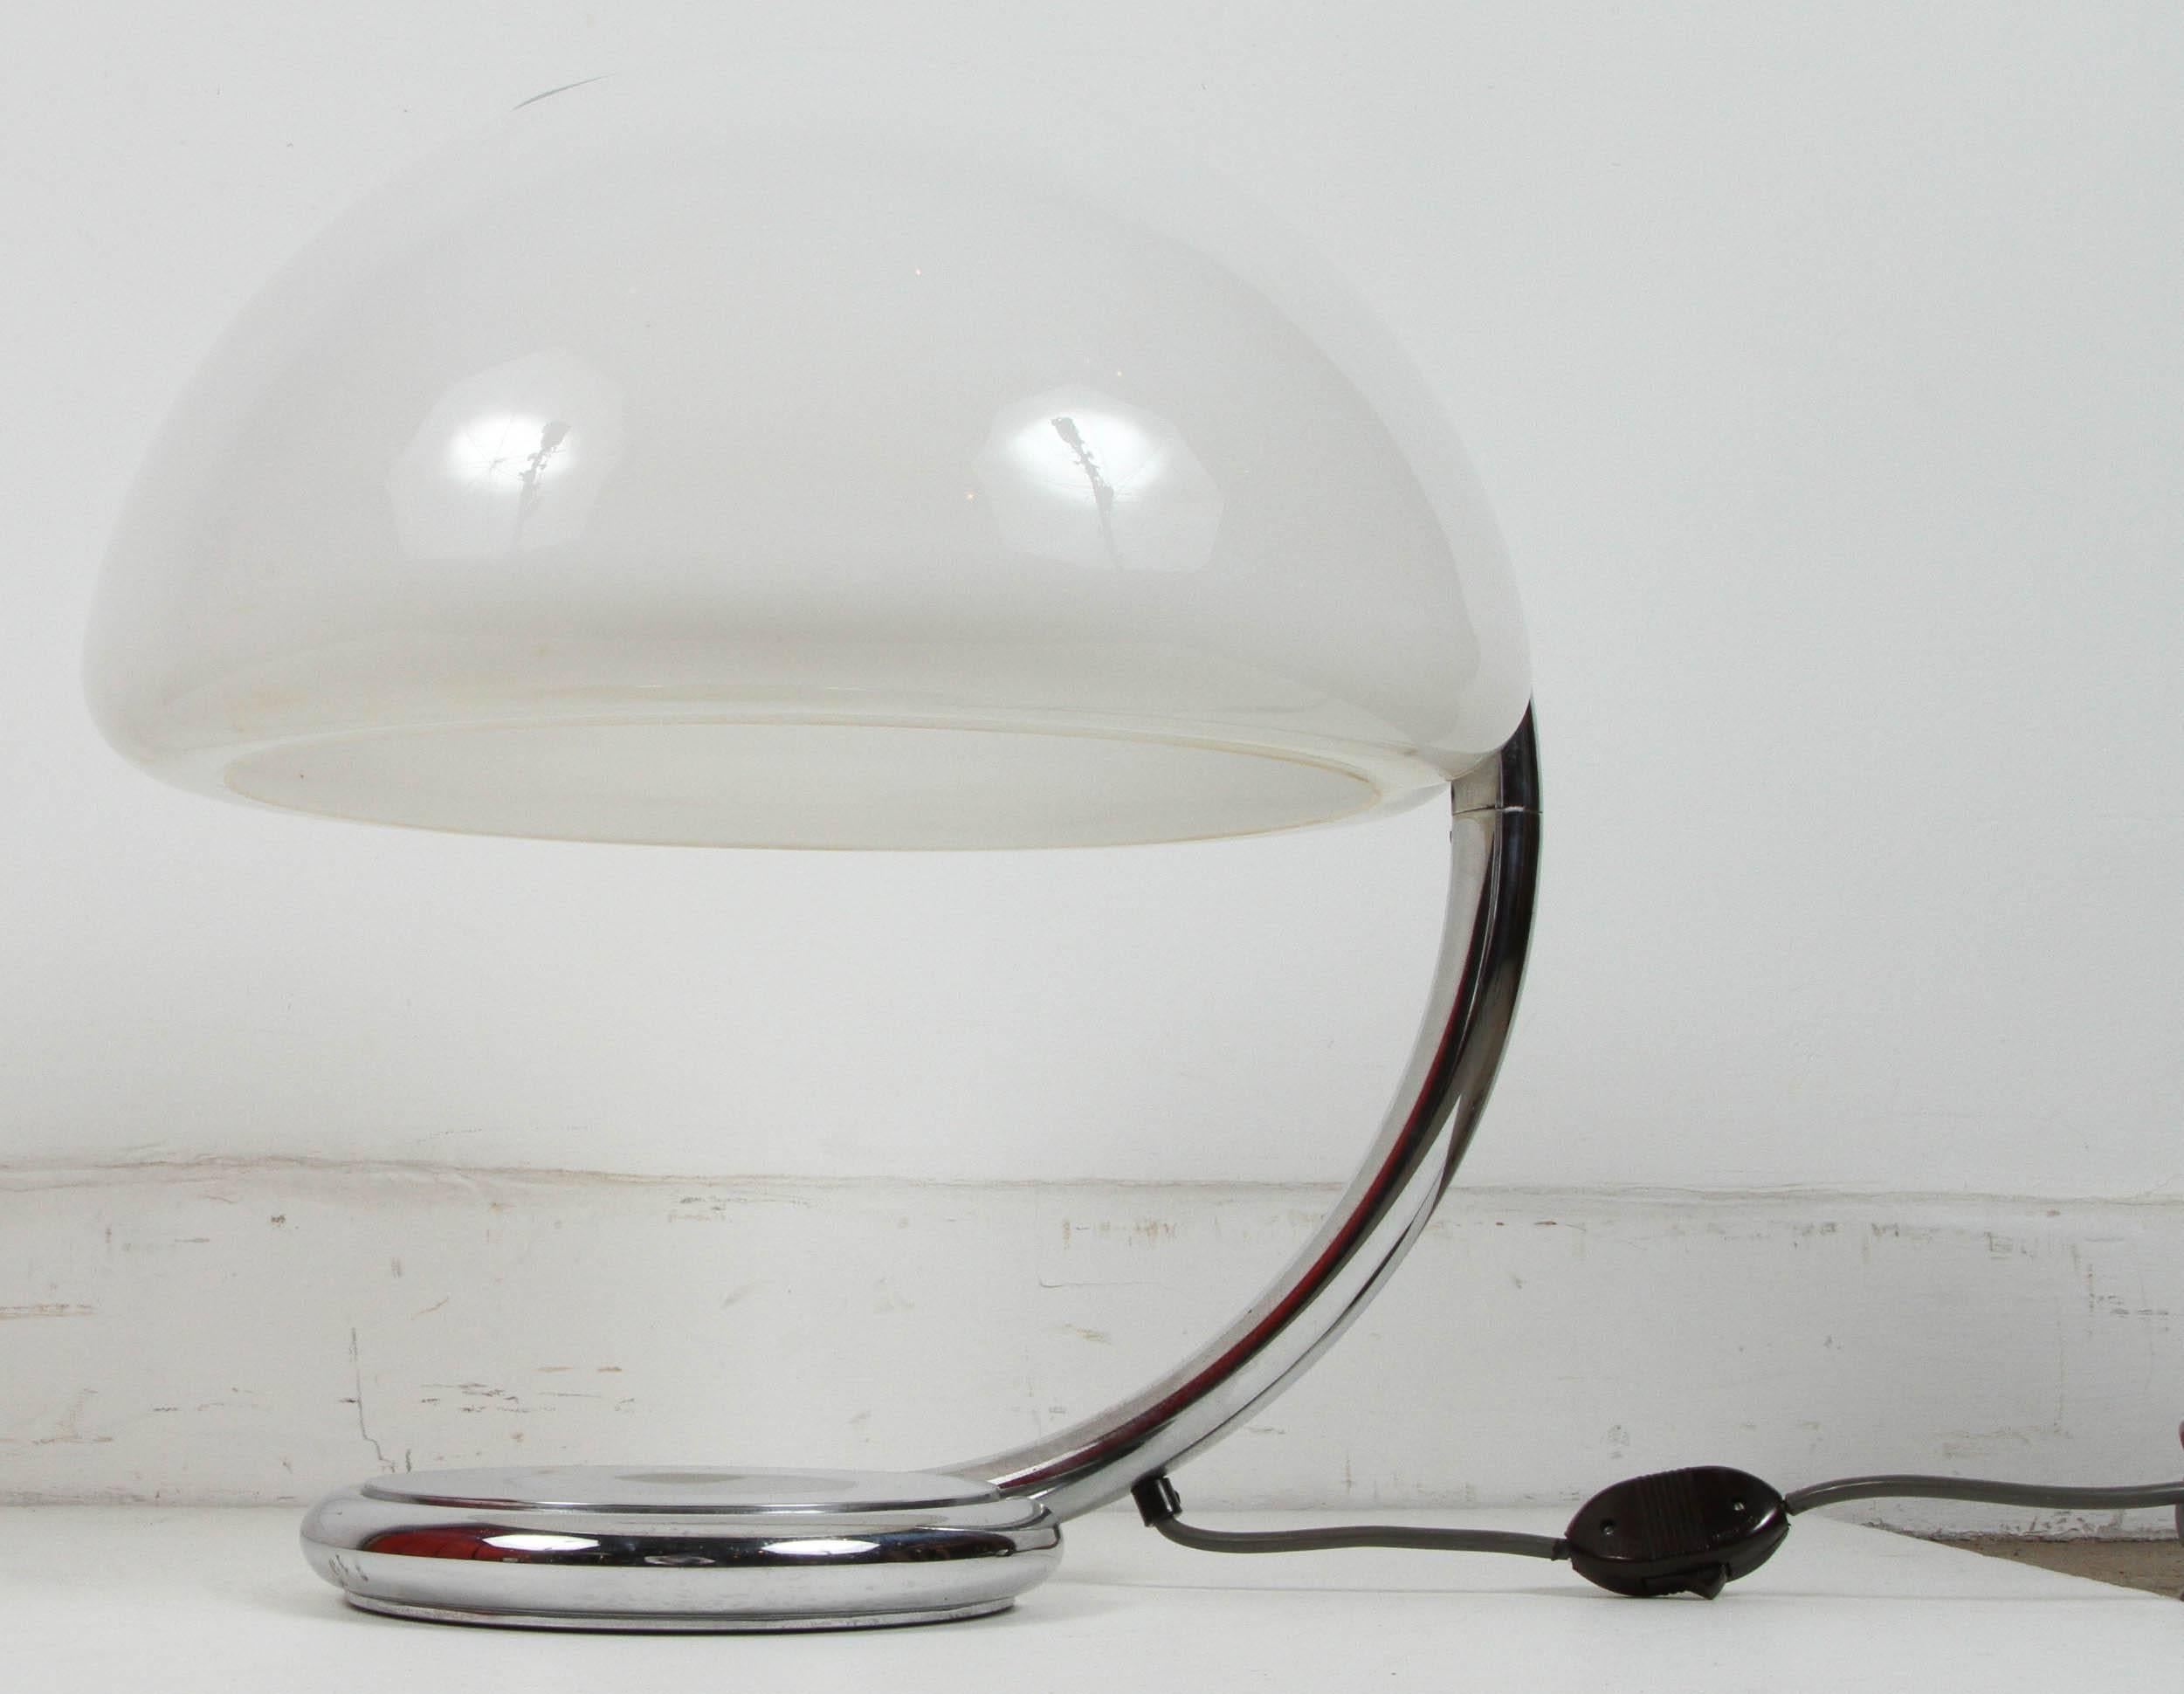 Vintage 1960s chrome-plated table lamp designed by Elio Martinelli with pivoting curved upper arm, white opal methacrylate diffuser shade.
Made in Italy.